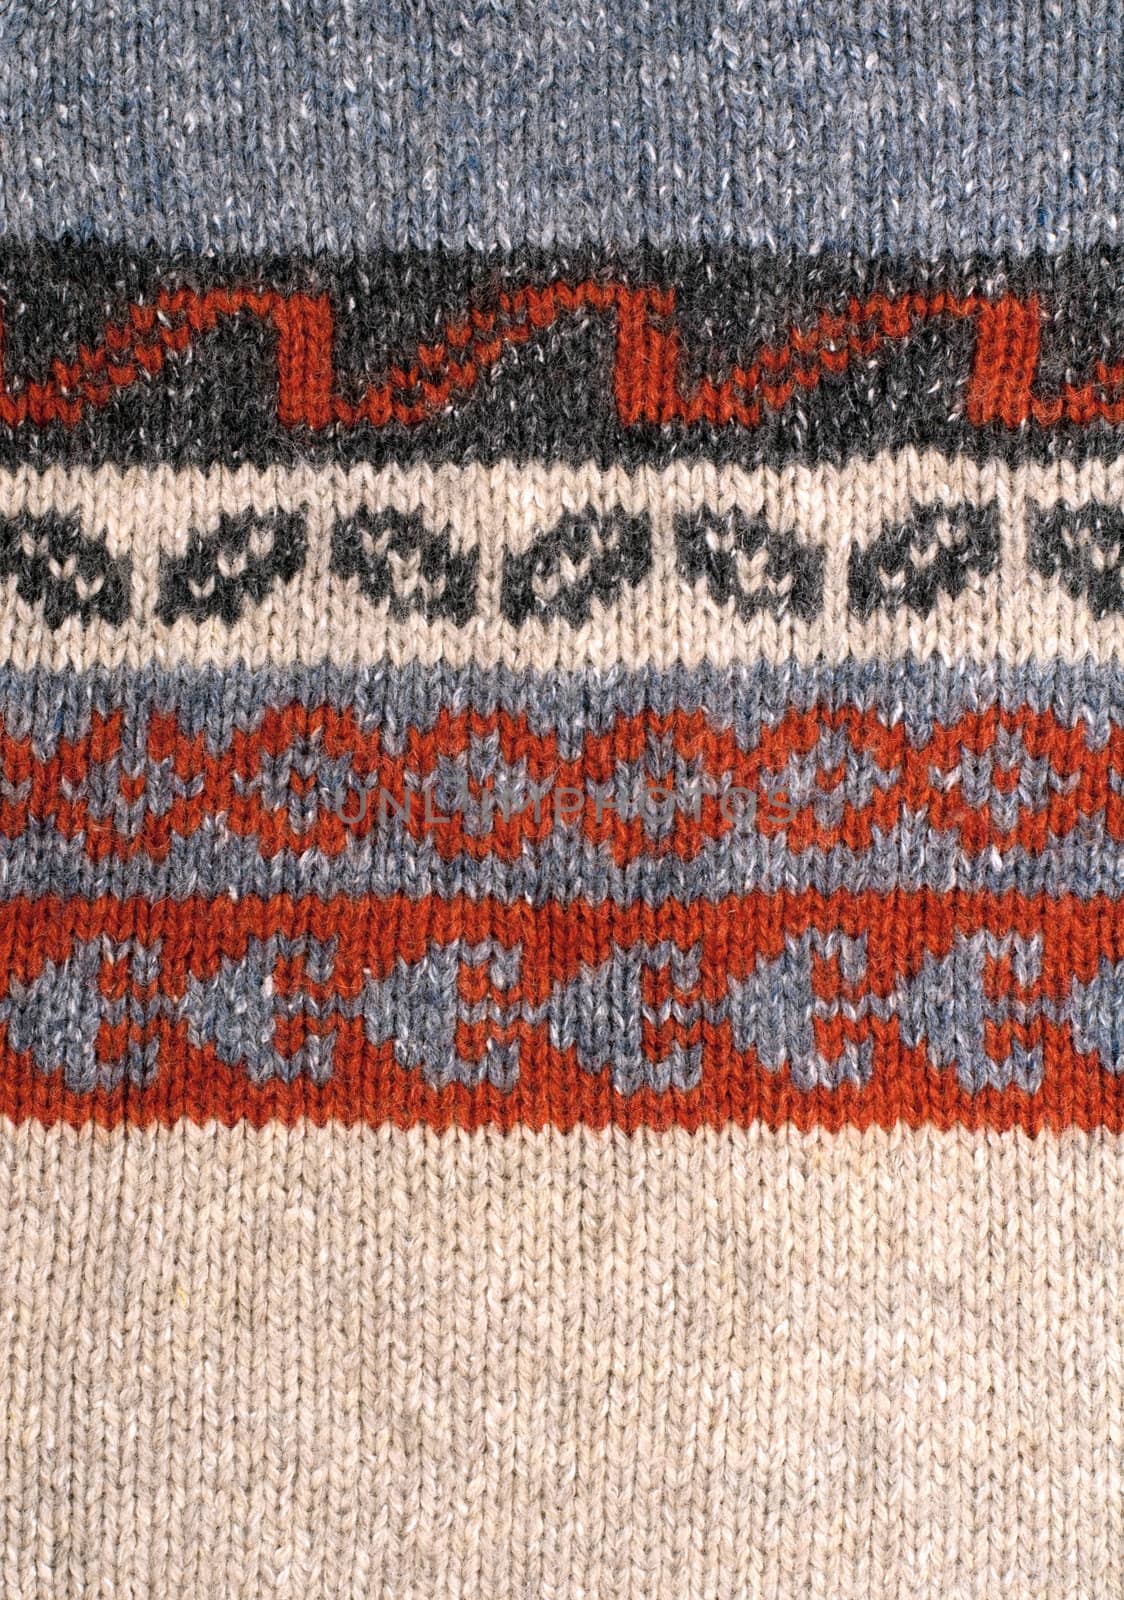 Knitting texture with ornament